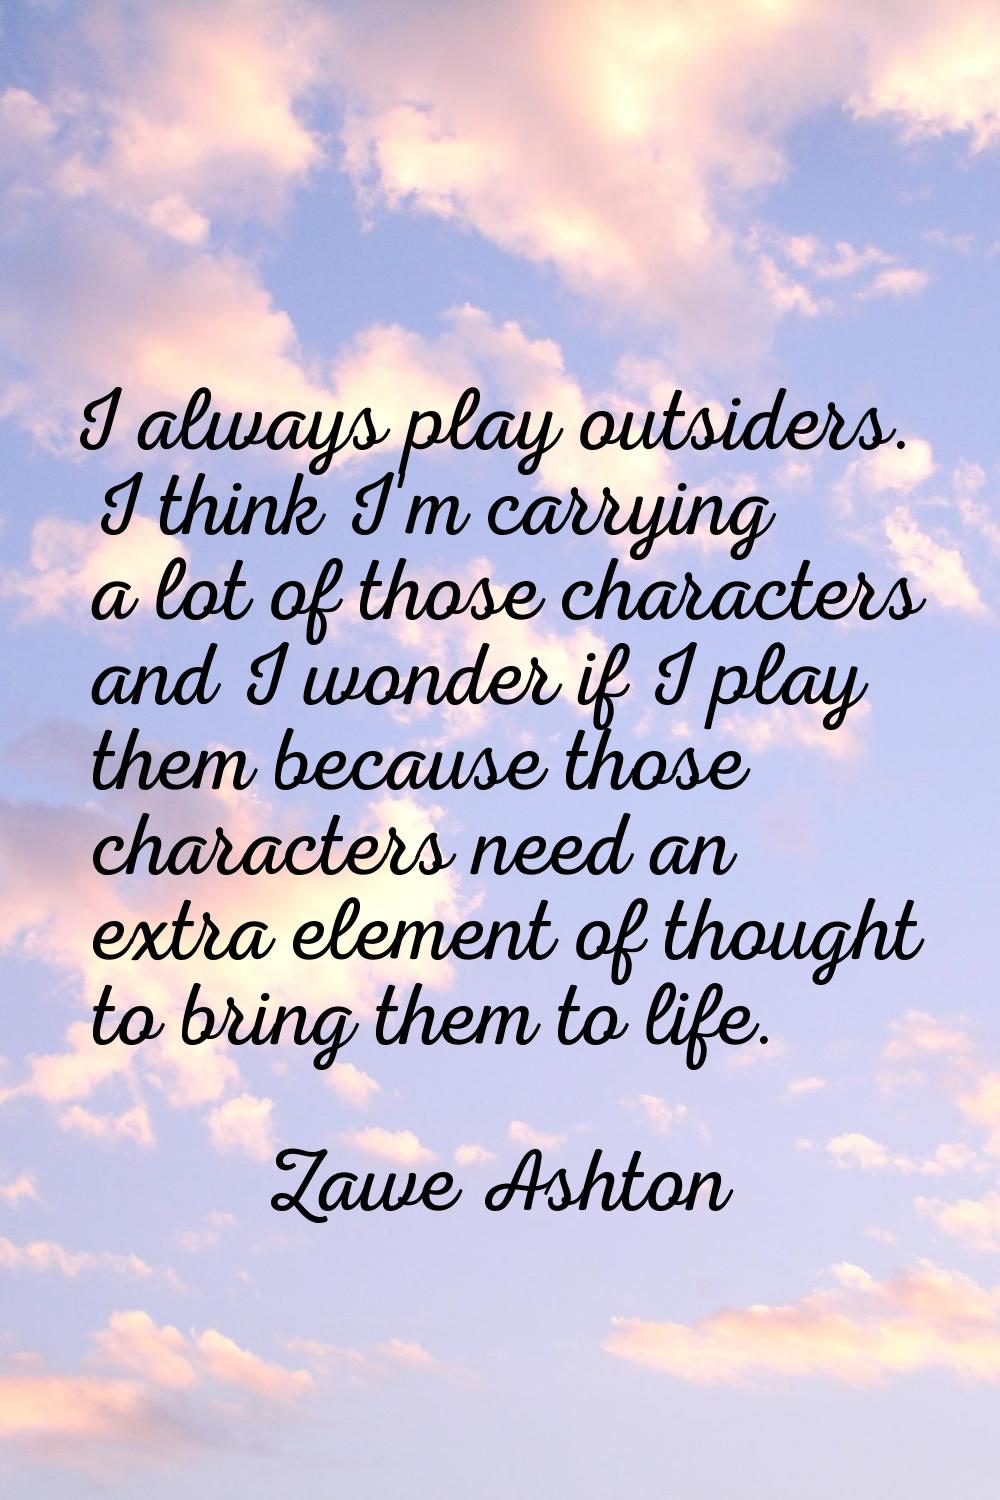 I always play outsiders. I think I'm carrying a lot of those characters and I wonder if I play them